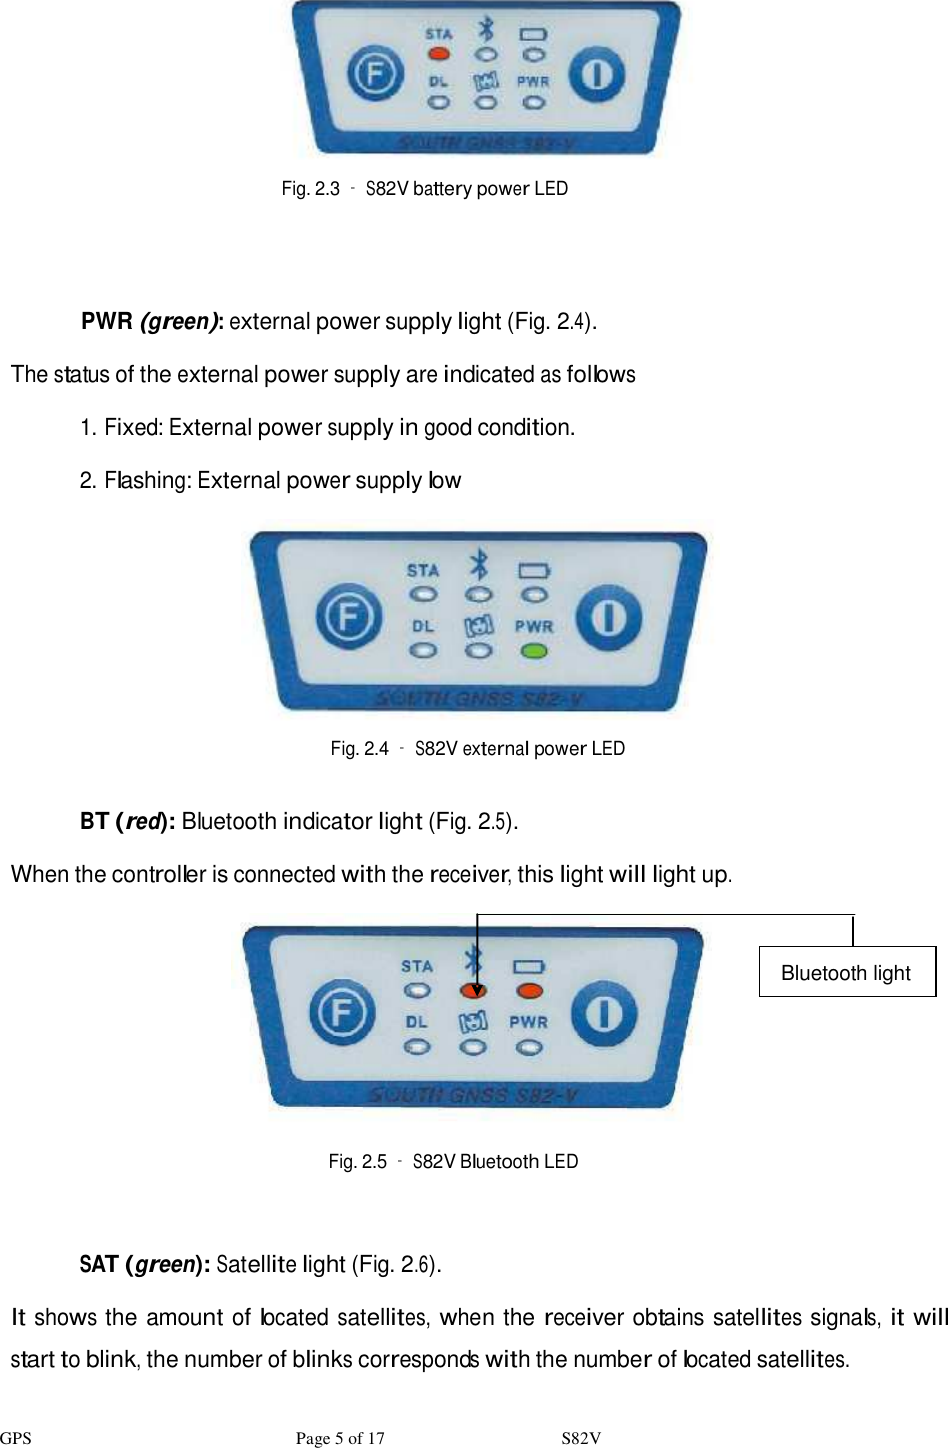 GPS                              Page 5 of 17                    S82V    Fig. 2.3 – S82V battery power LED      PWR (green): external power supply light (Fig. 2.4).  The status of the external power supply are indicated as follows  1. Fixed: External power supply in good condition.  2. Flashing: External power supply low    Fig. 2.4 – S82V external power LED   BT (red): Bluetooth indicator light (Fig. 2.5).  When the controller is connected with the receiver, this light will light up.     Bluetooth light          Fig. 2.5 – S82V Bluetooth LED    SAT (green): Satellite light (Fig. 2.6).  It shows the amount of located satellites, when the receiver obtains satellites signals, it will start to blink, the number of blinks corresponds with the number of located satellites.  